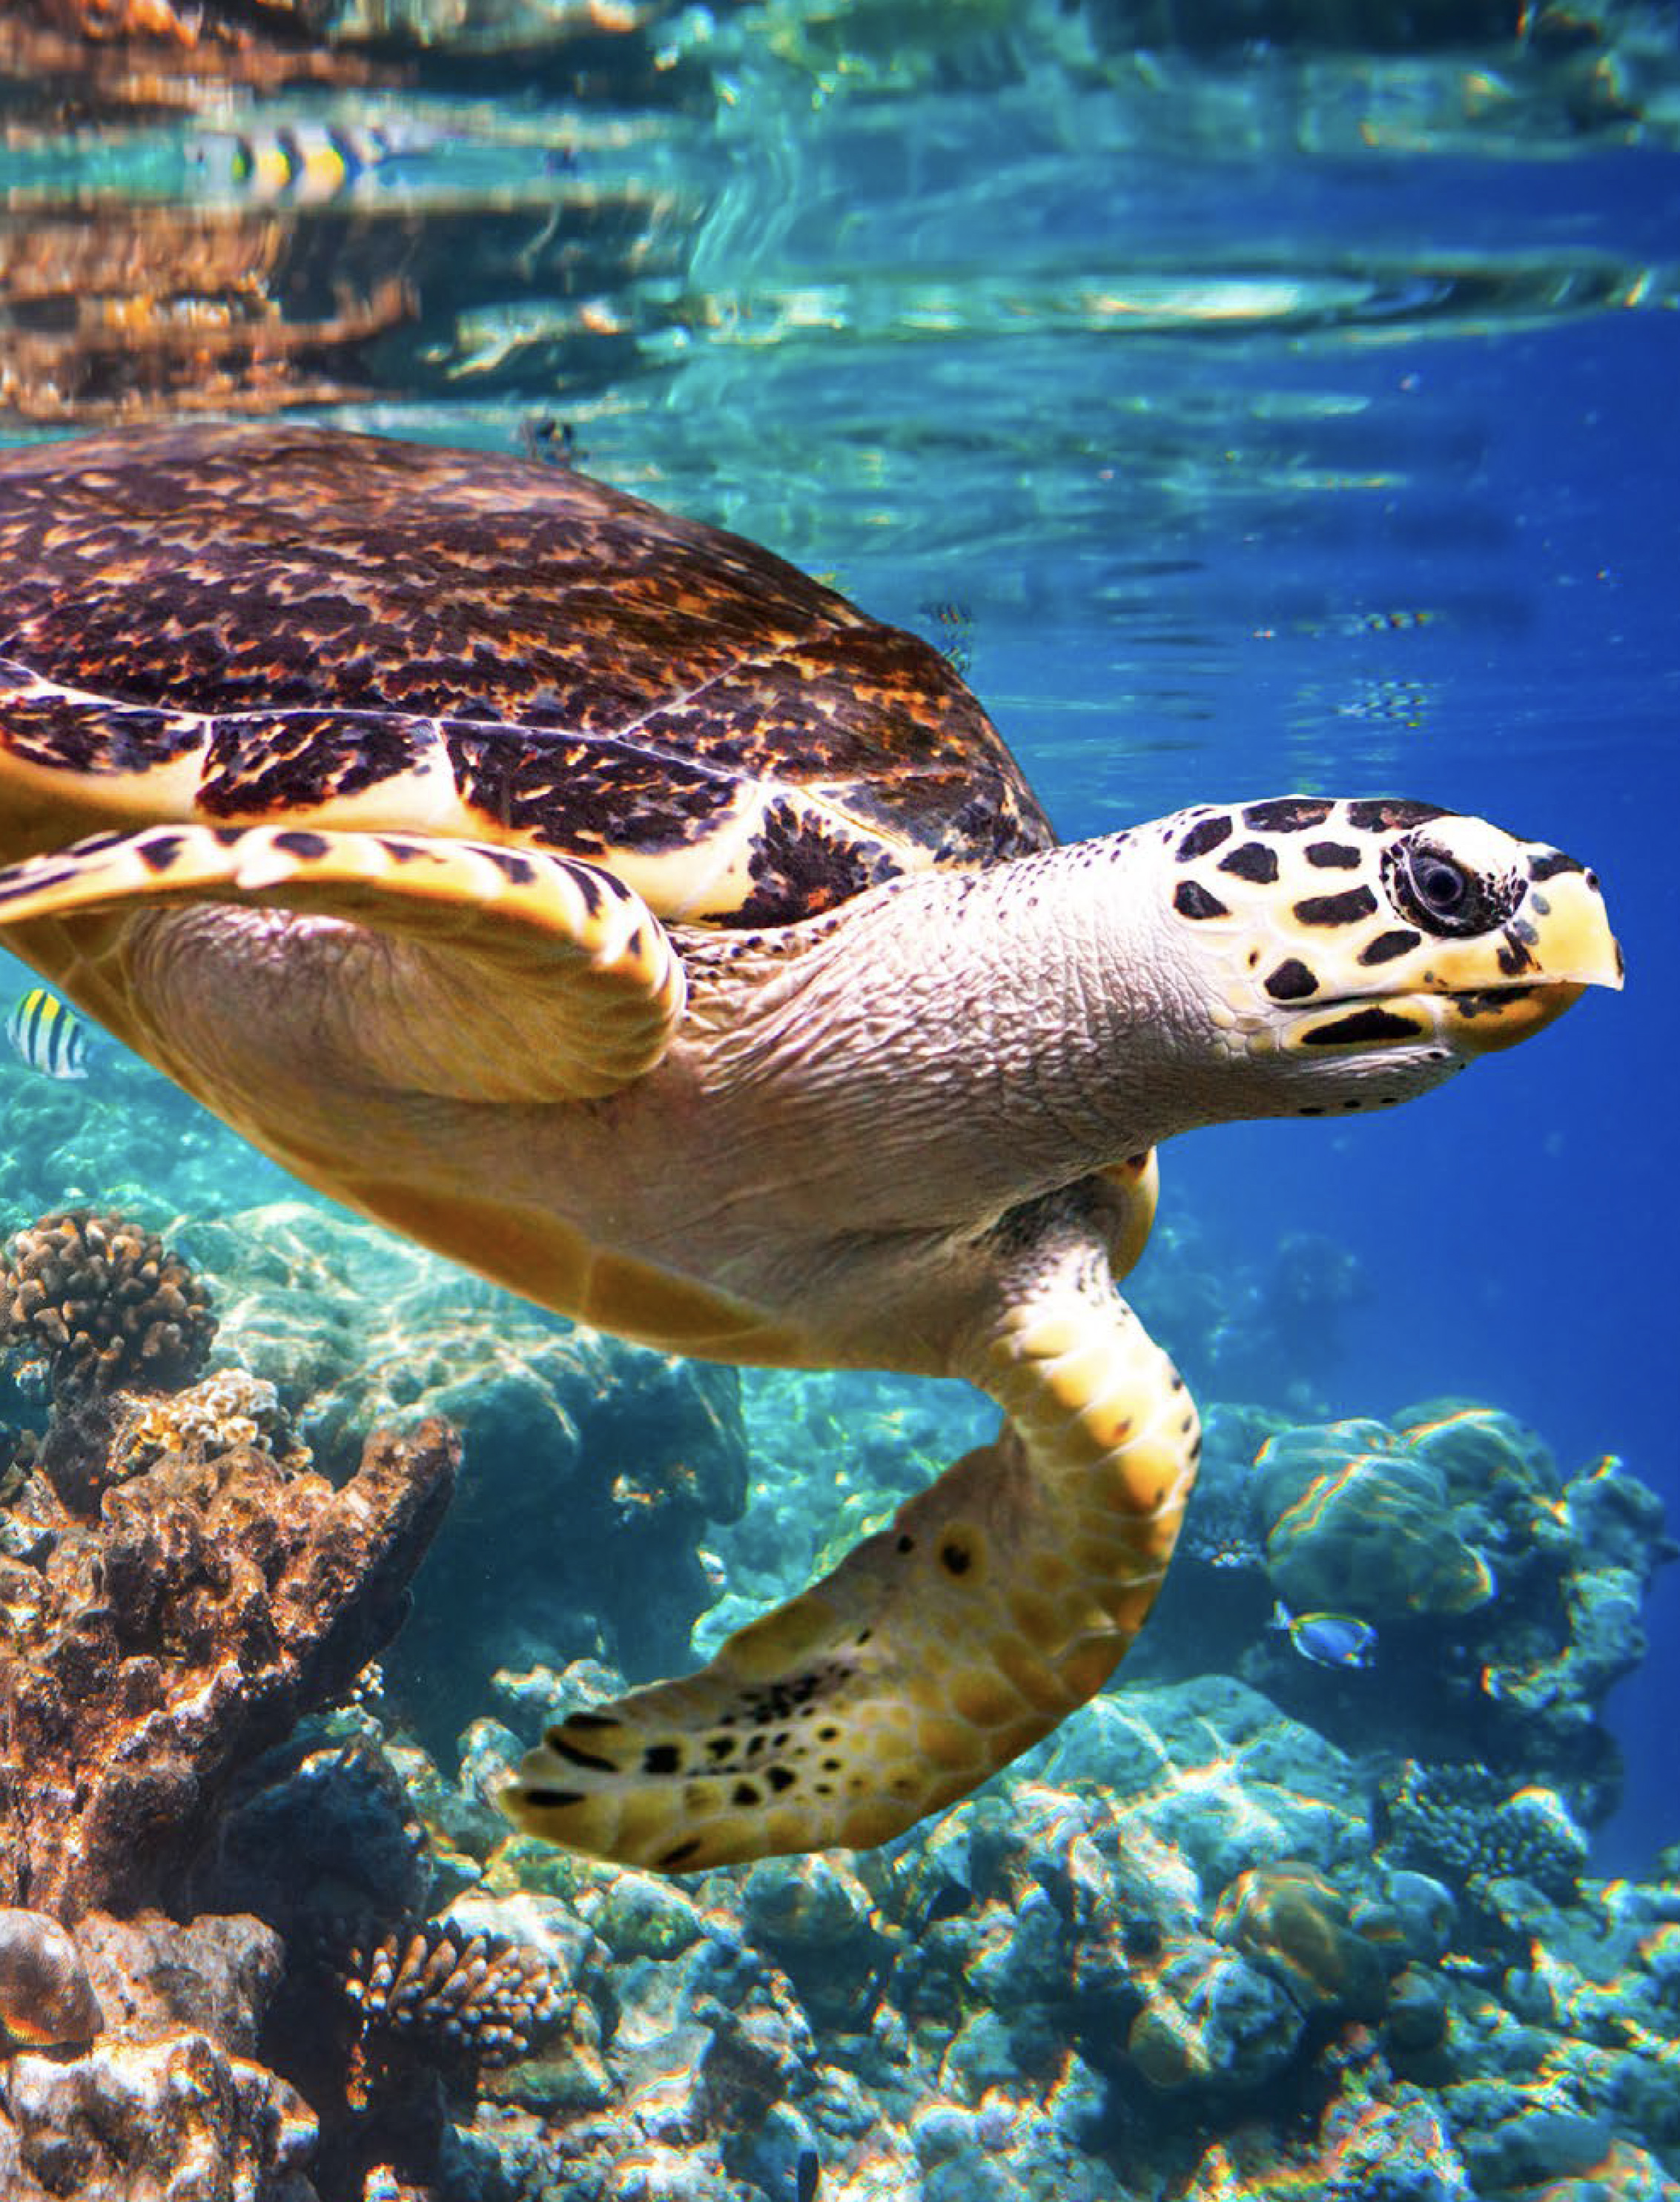 Turtle swimming near the coral reefs in the Al Yasat Protected Area